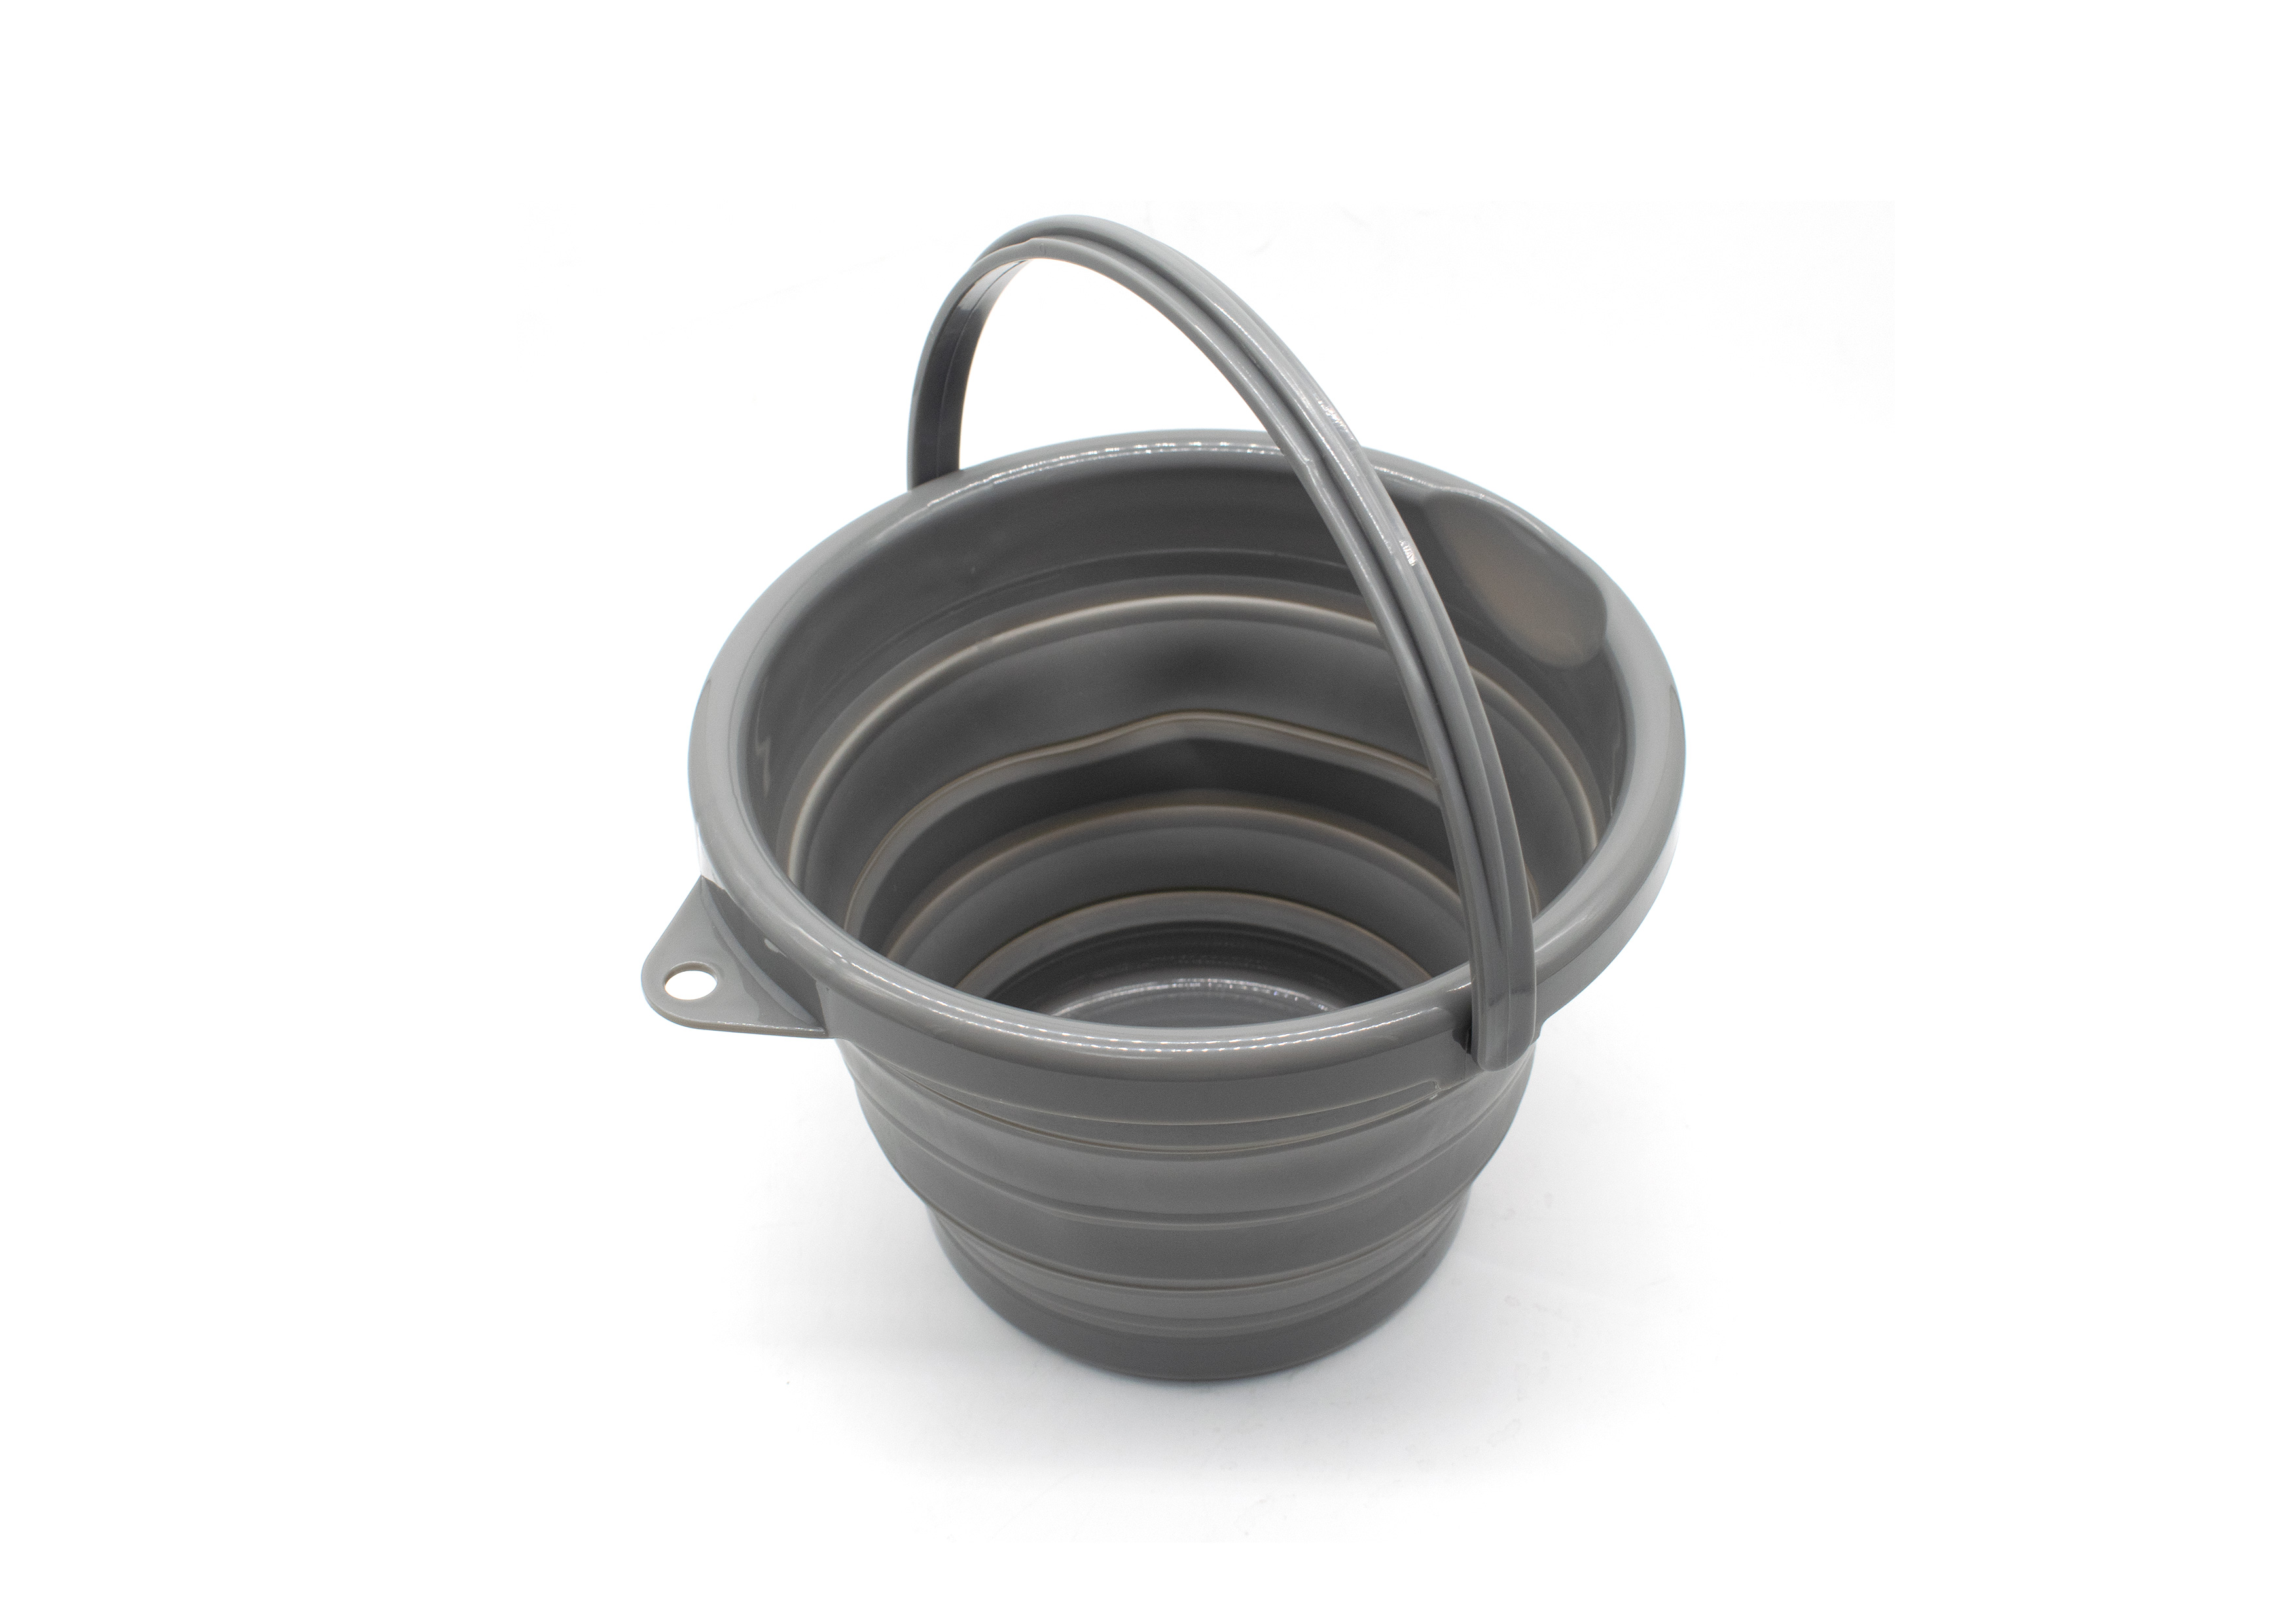  Collapsible Bucket